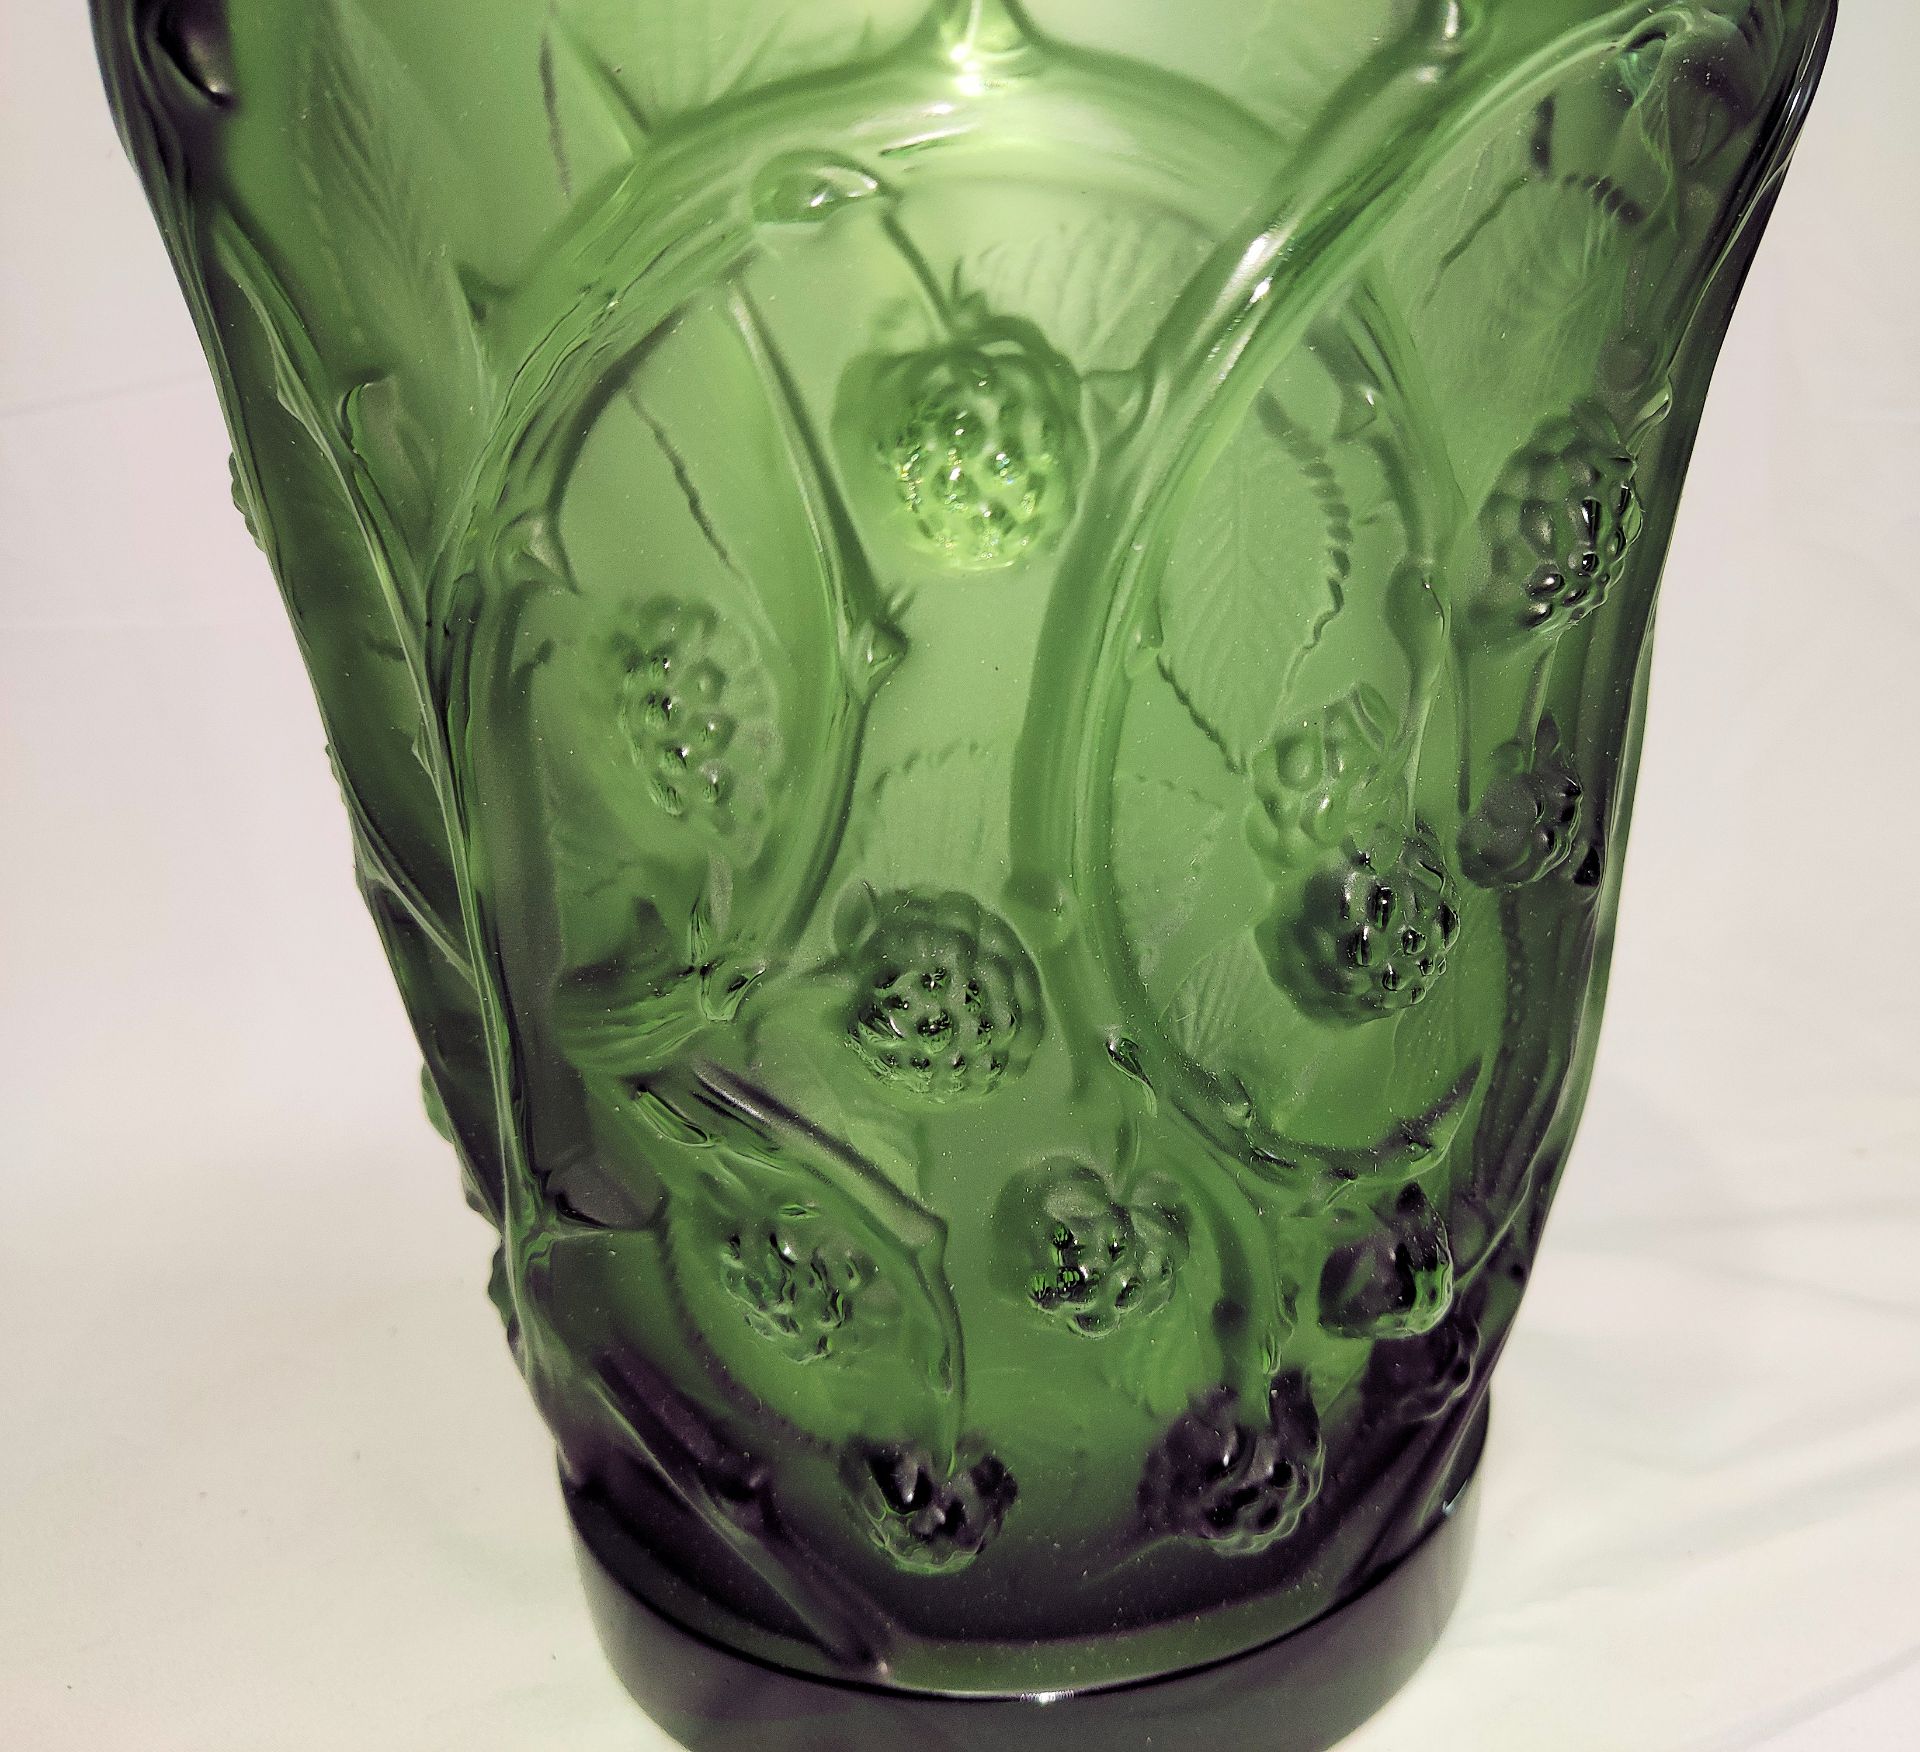 1 x LALIQUE 'Mures' Exquisite Handcrafted French Green Crystal Medium Vase - Original RRP £2,690 - Image 9 of 23